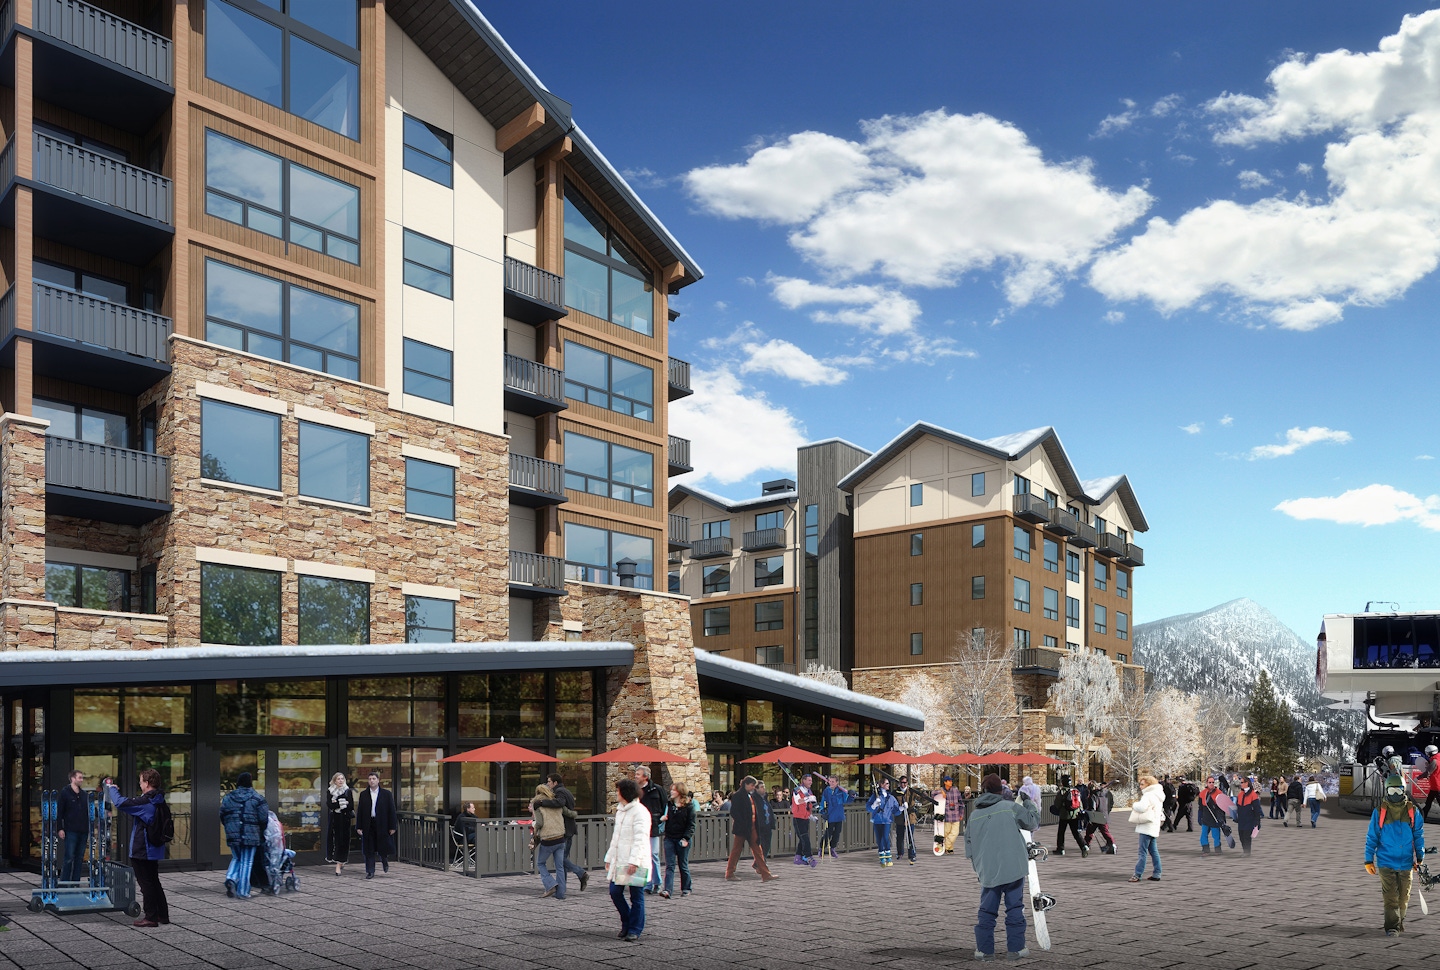 In Keystone, luxury amenities, residences and a hotel take center